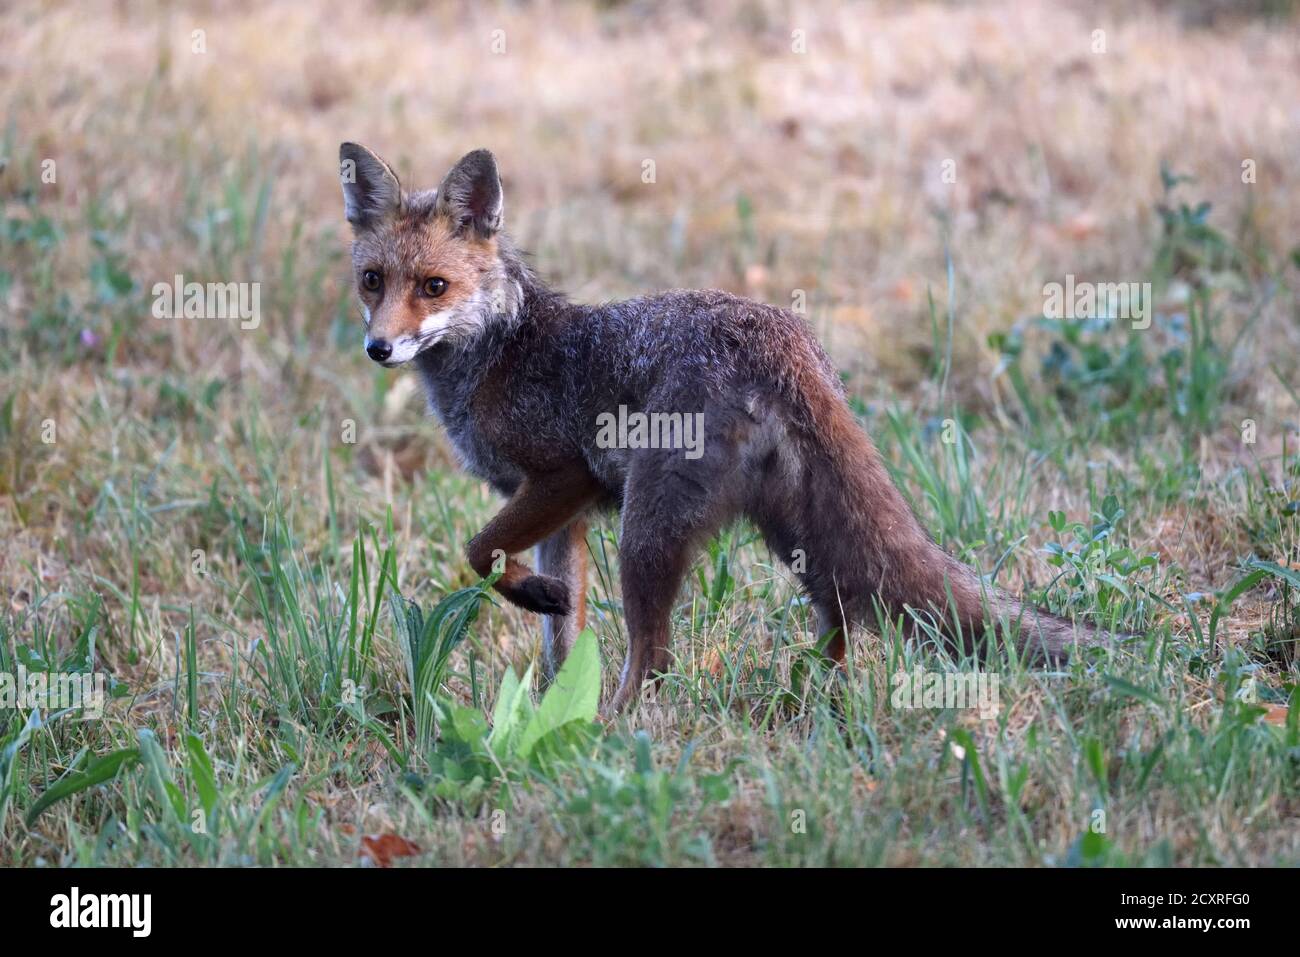 Watchful or Alert Red Fox, Vulpes vulpes Stock Photo